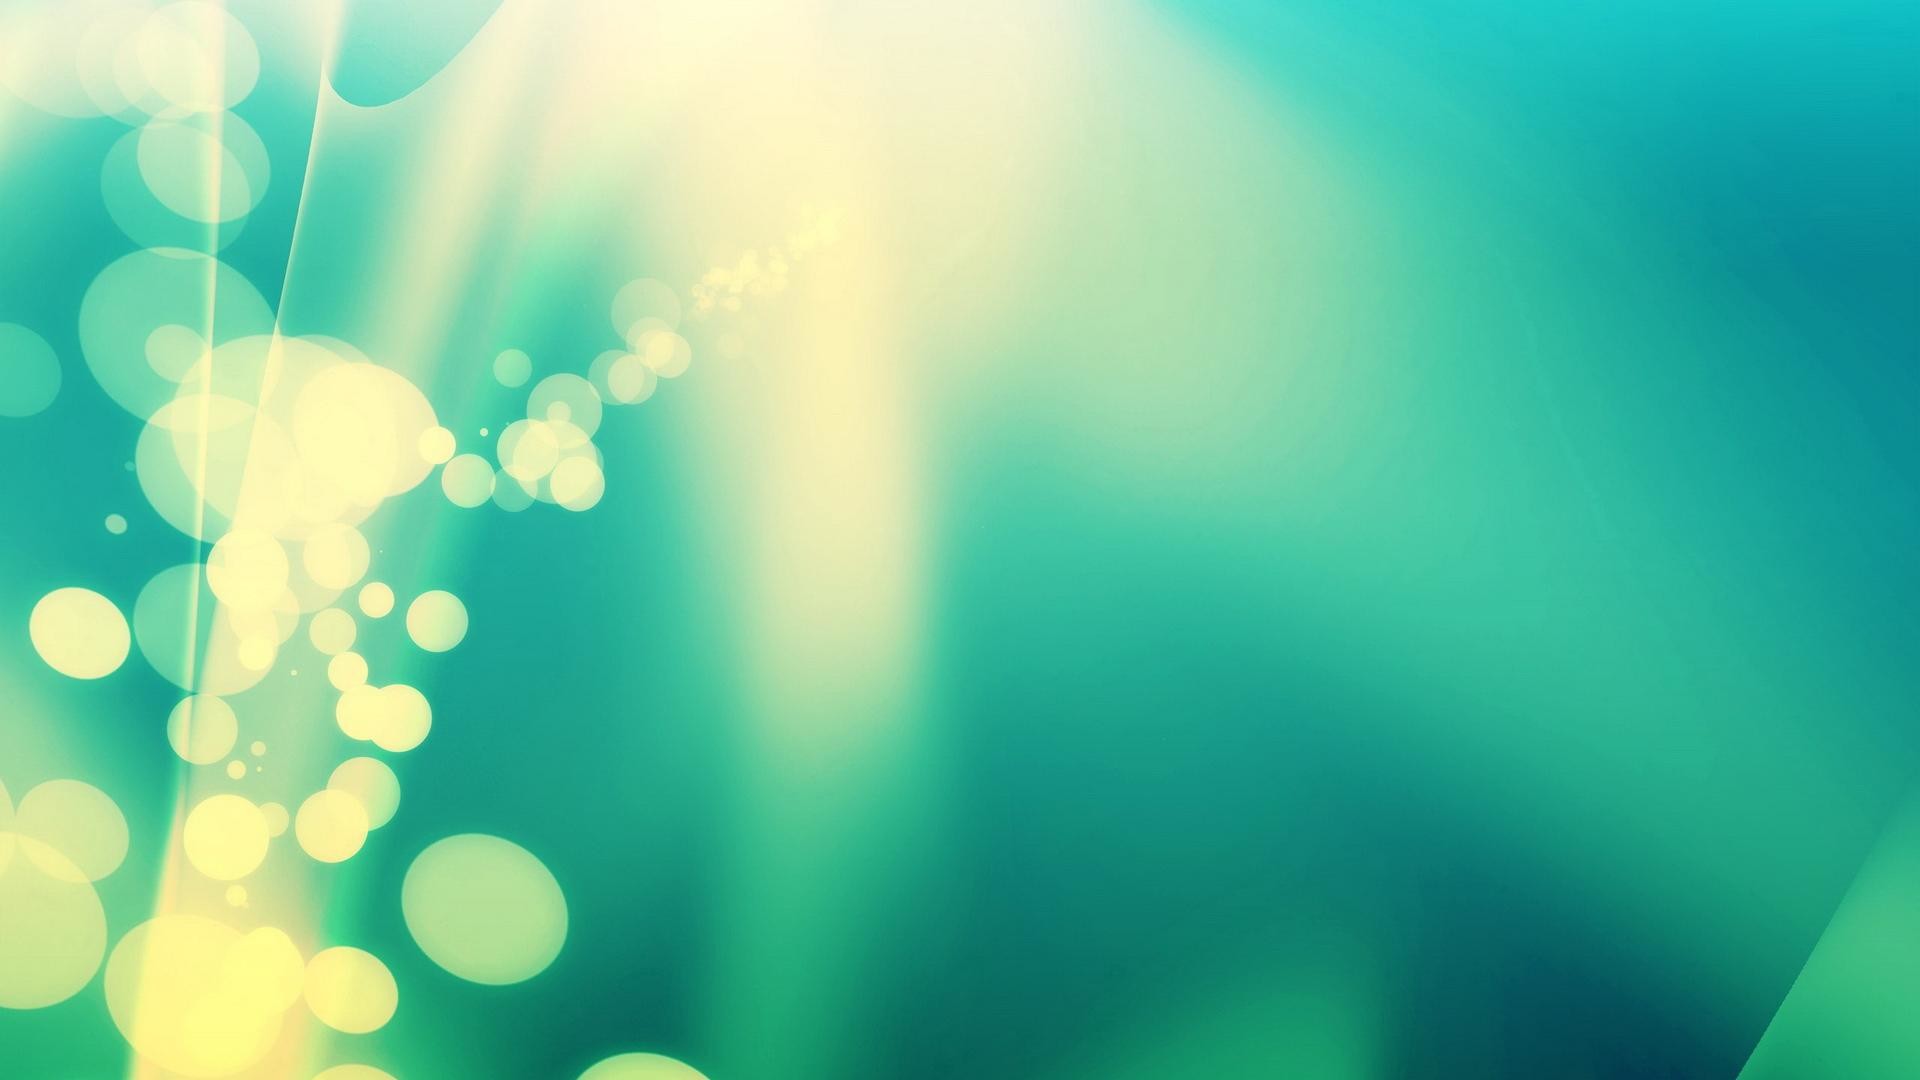 1920x1080  Vector light green backgrounds wide  wallpapers:1280x800,1440x900,1680x1050 - hd backgrounds